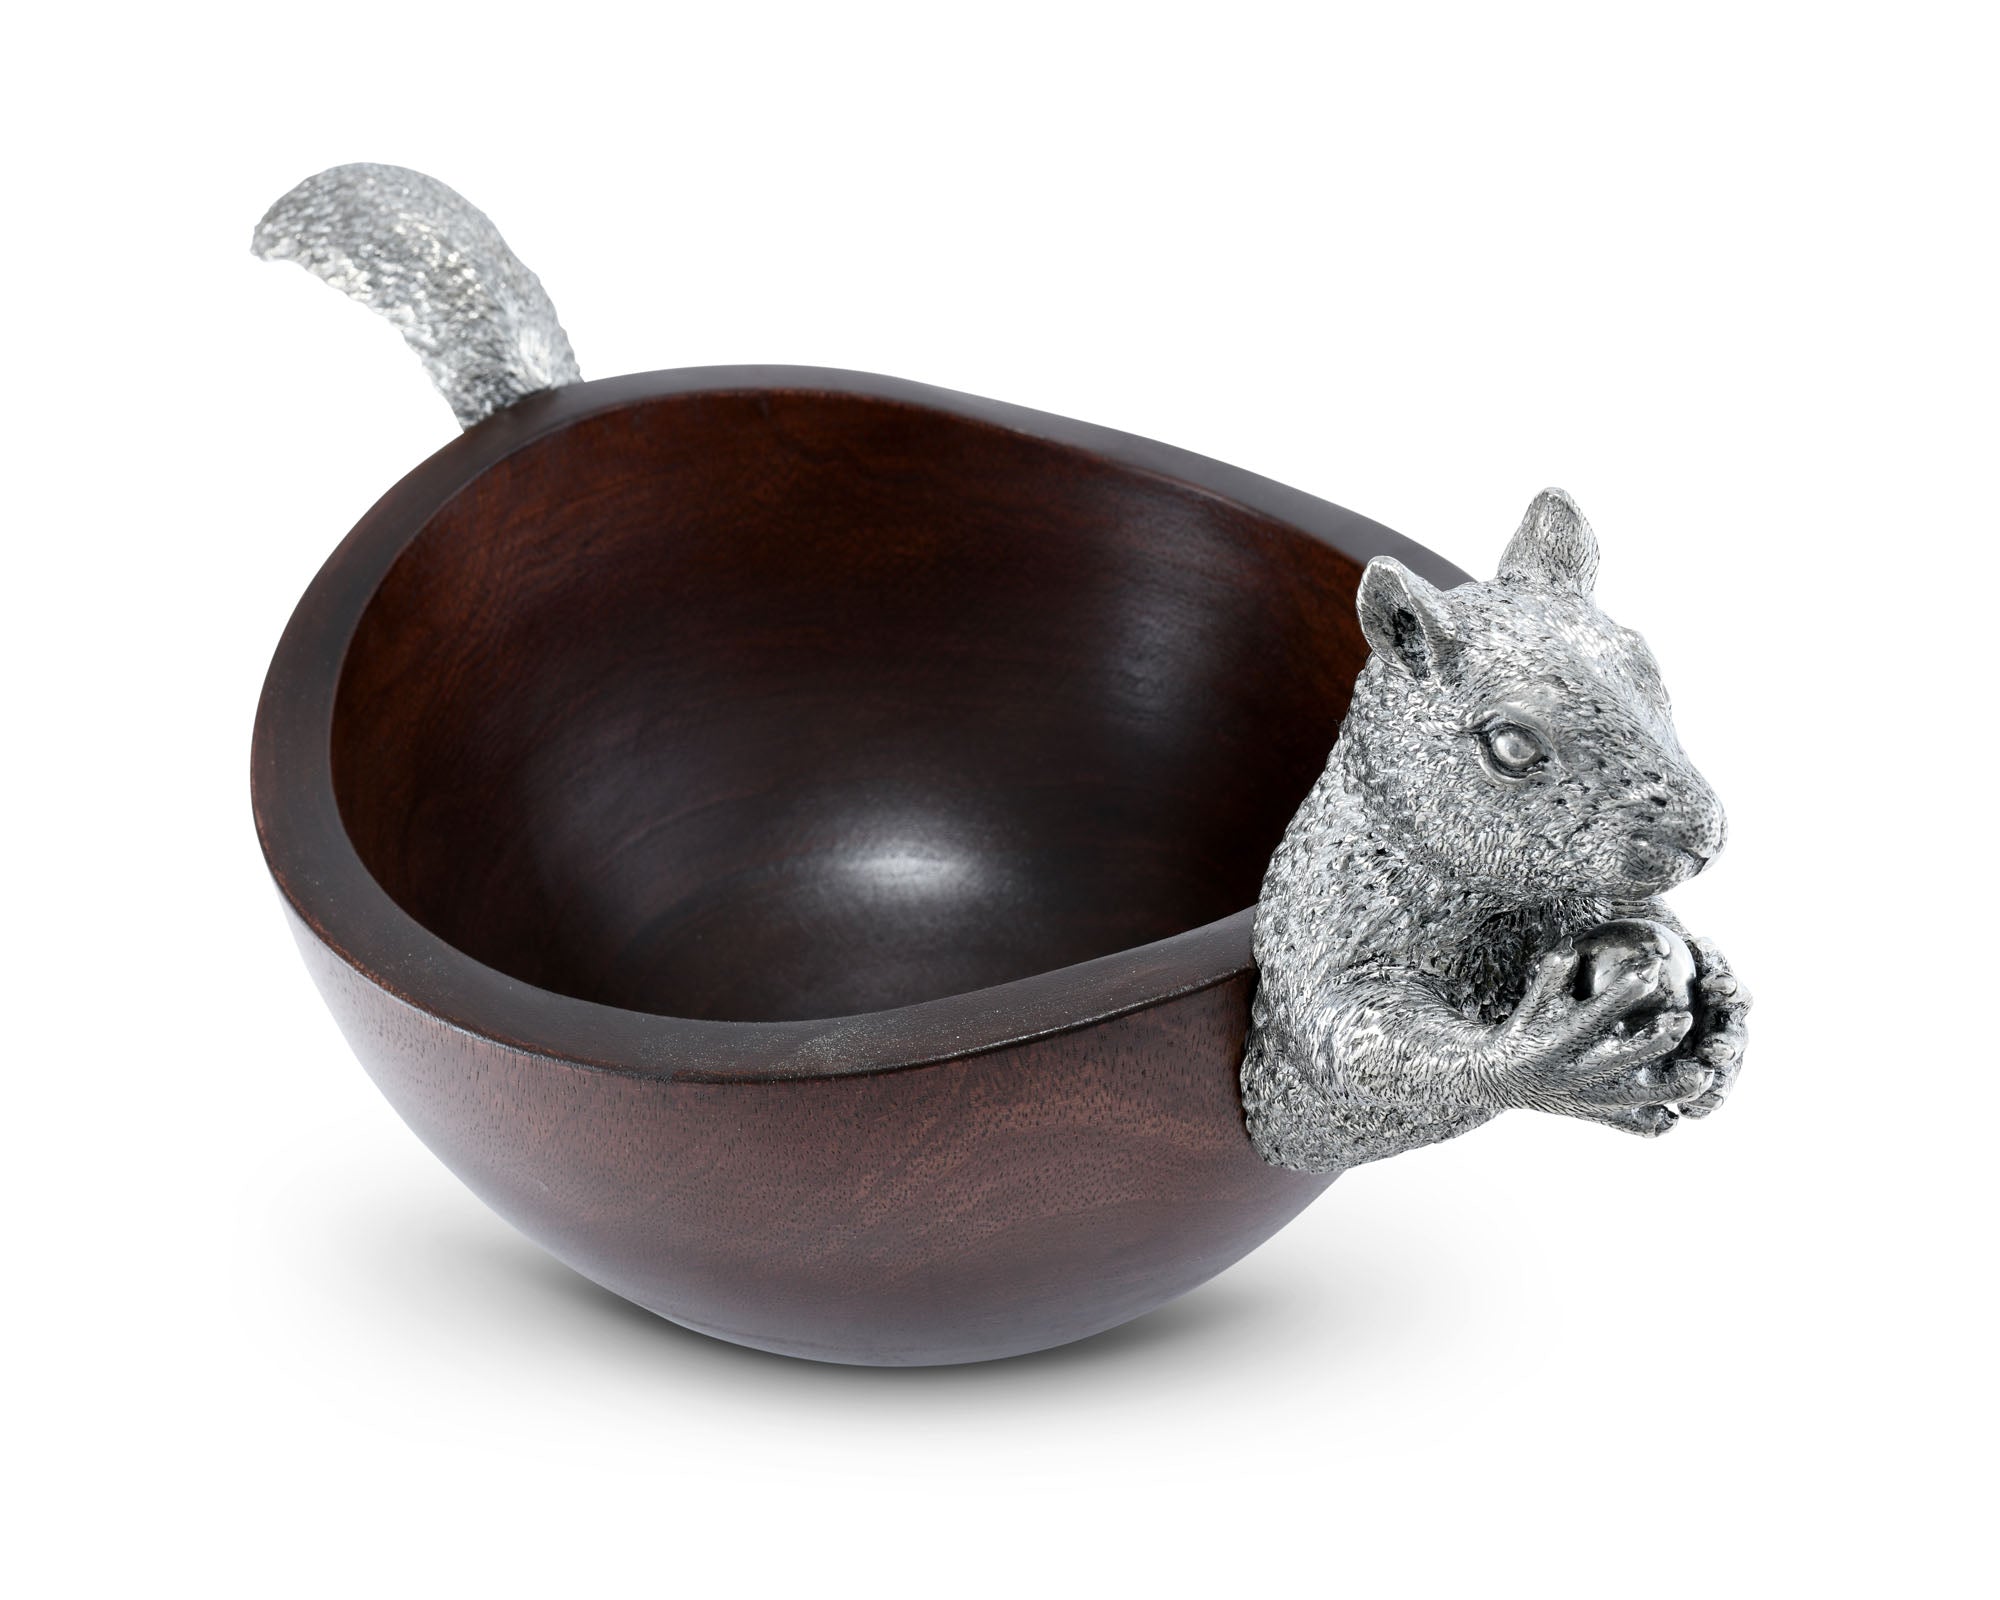 Vagabond House Squirrel Head and Tail Nut Bowl - Lg Product Image